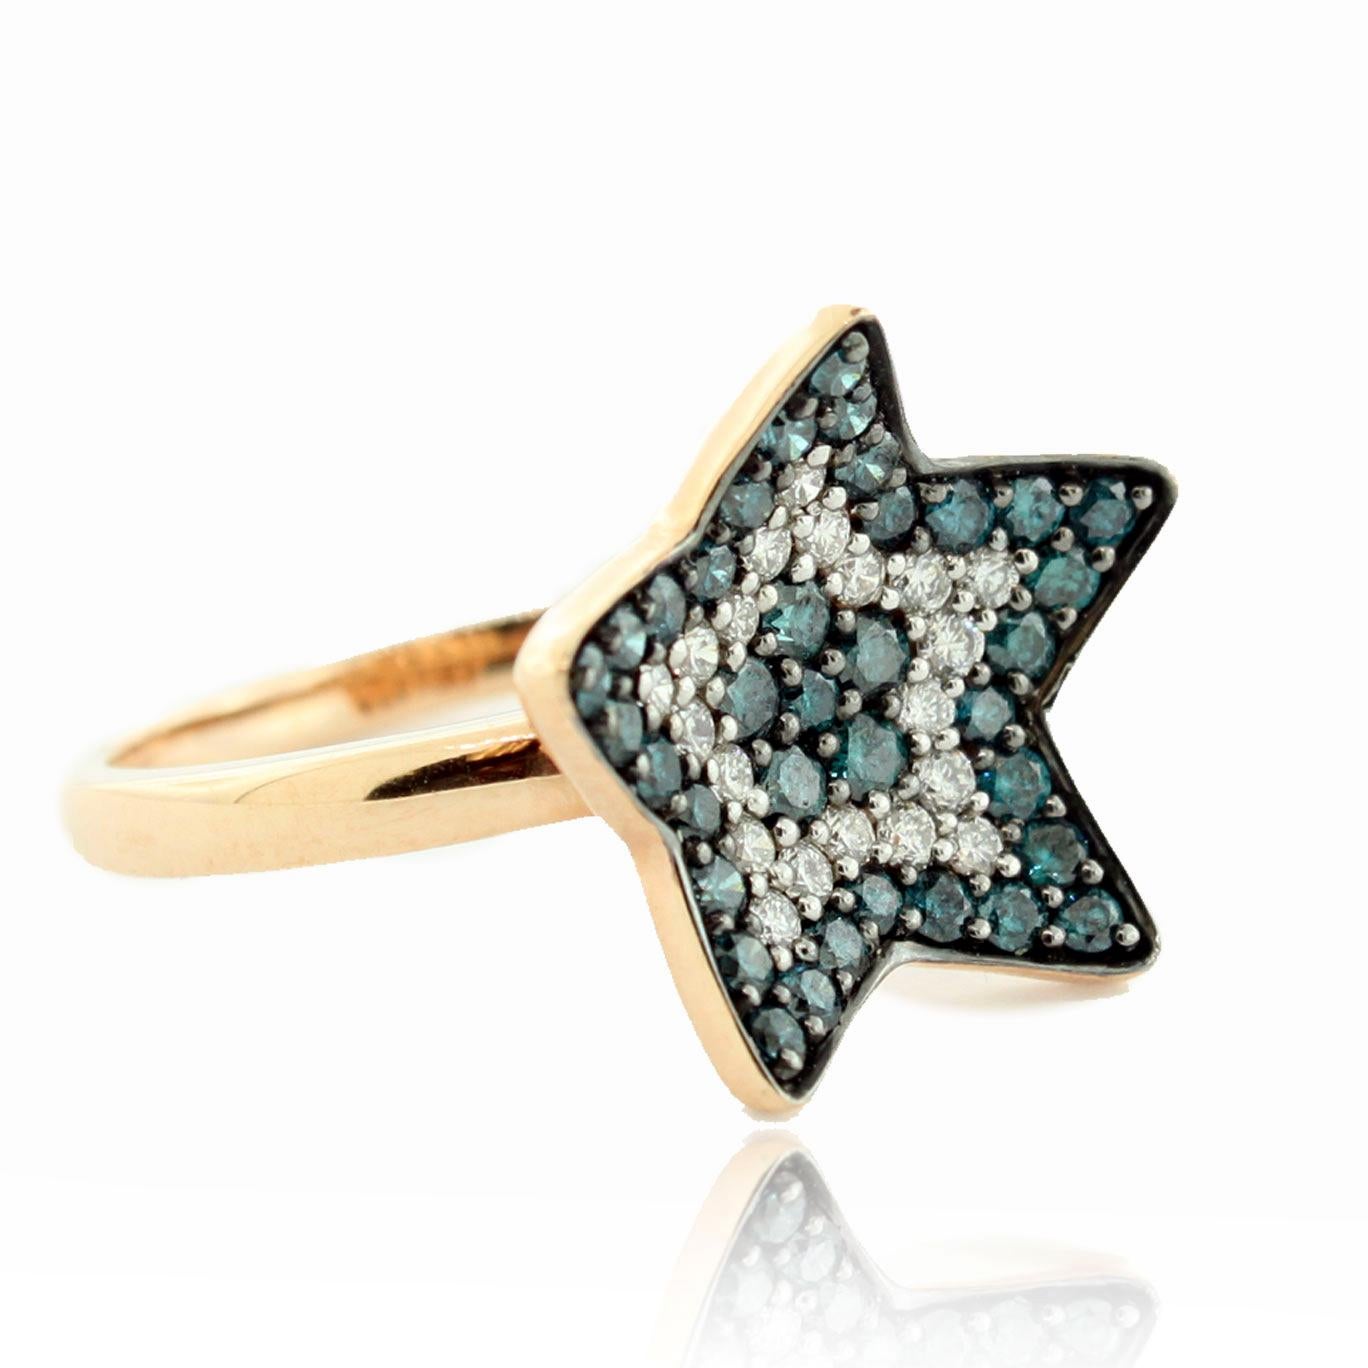 This spectacular star shaped ring from the Suzy Levian Limited Edition collection is set in 14k rose gold shank. Alternating rows of blue and white diamonds (1.02cttw) creates a perfect star design for only the classiest of women. The brilliance of